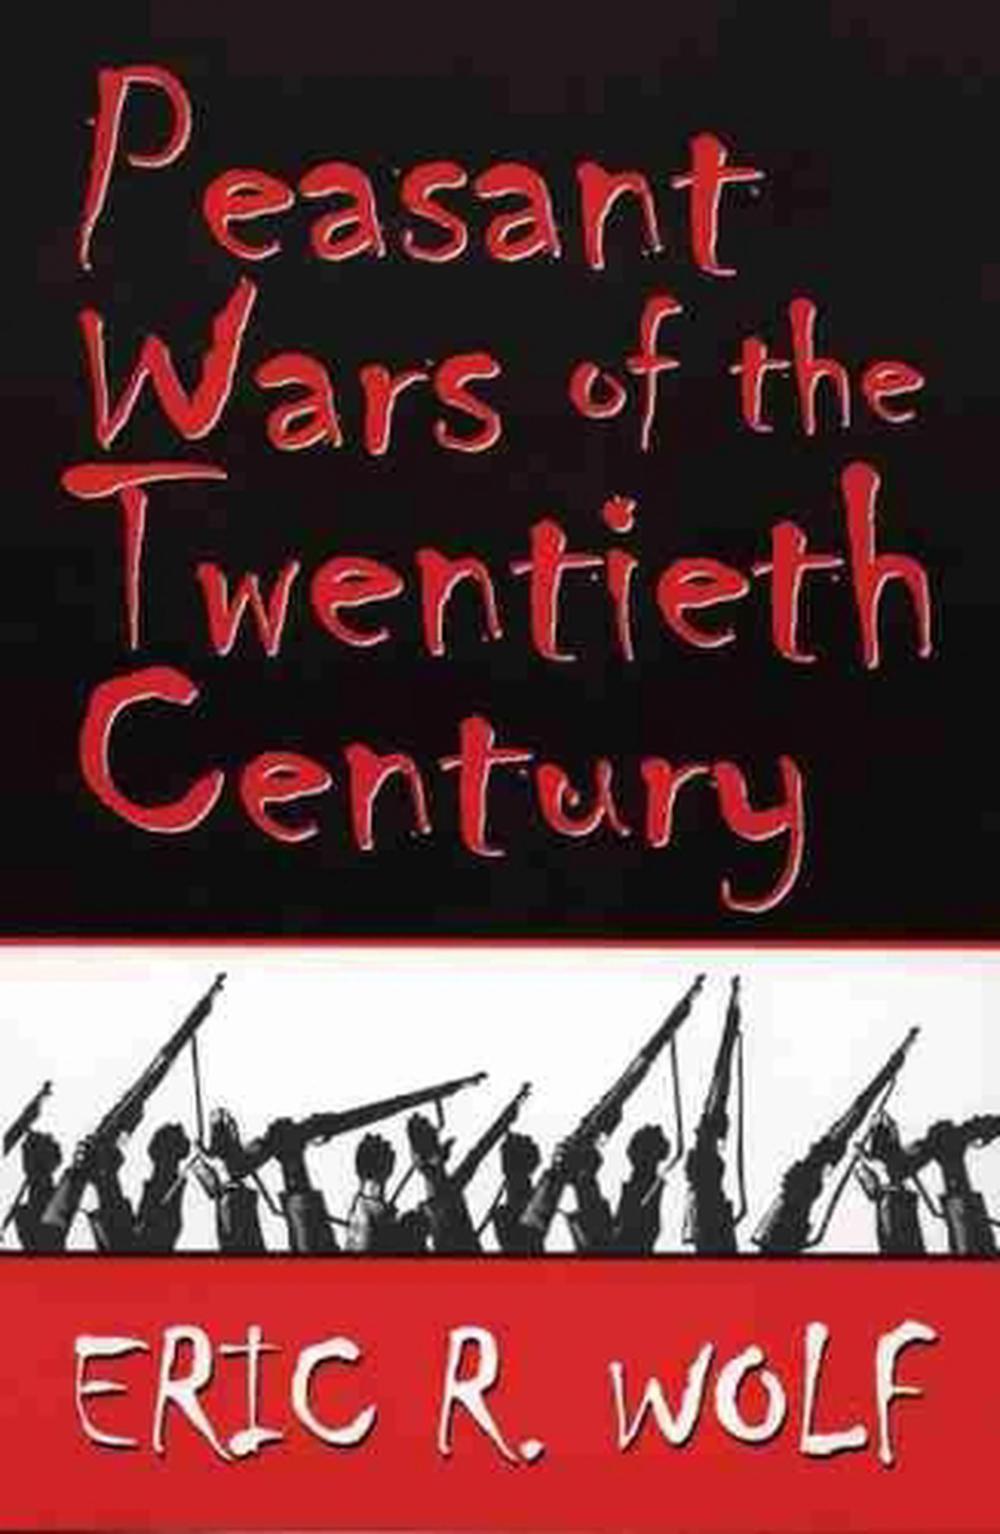 Peasant Wars of the Twentieth Century by Eric R. Wolf (English) Paperback Book F 9780806131962